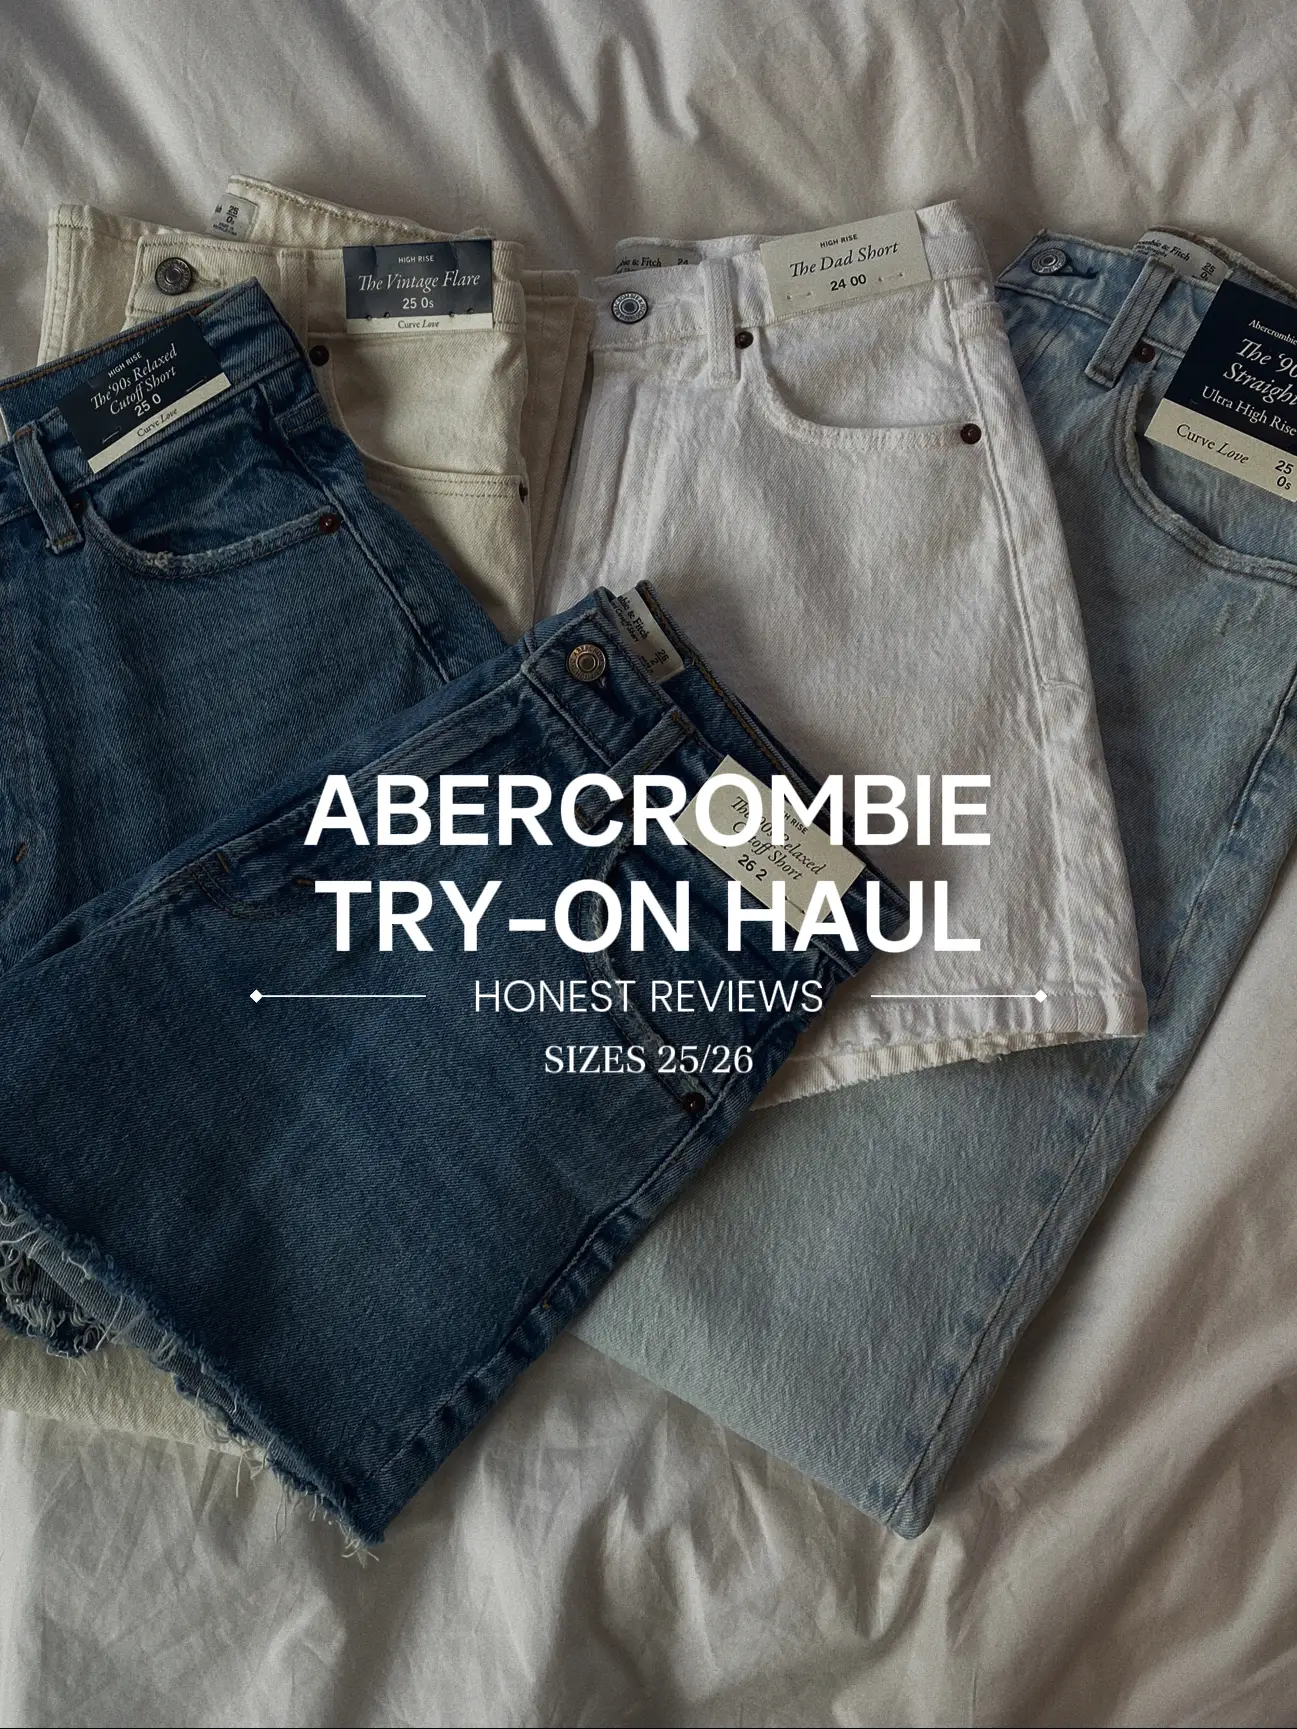 Abercrombie & Fitch CURVE LOVE JEANS try on!